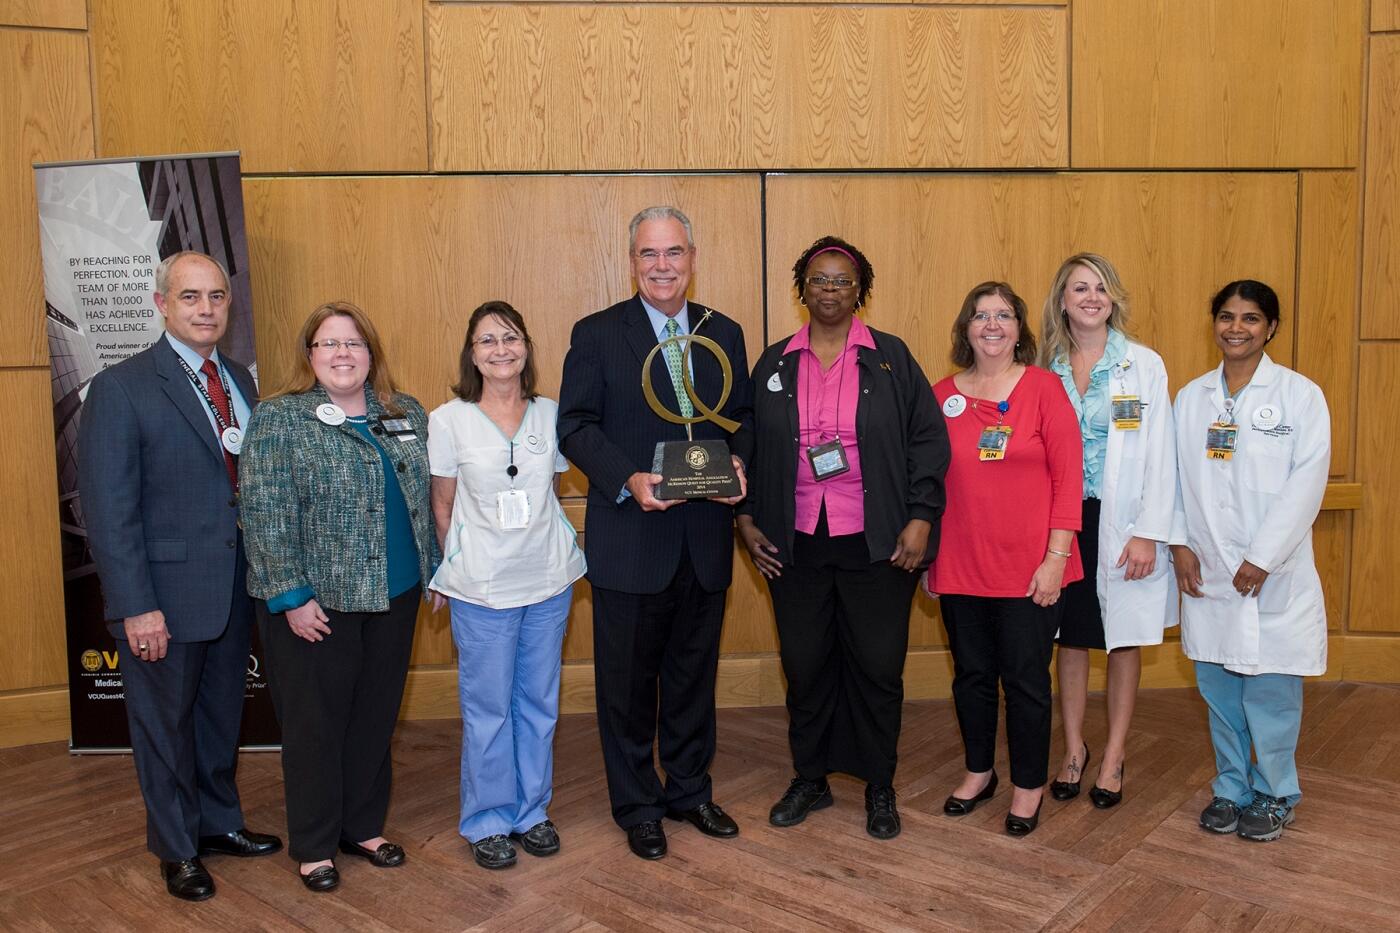 Photo courtesy of University Relations. From left to right: Chris Graham, 2013 Employee of the Year; Susan Beavers, 2010 Employee of the Year; Janet Holloway, 2008 Employee of the Year; Rich Umbdenstock, President and CEO, American Hospital Association; Peaches Brooks-Davis, Safety Star; Karla Batten, 2007 Employee of the Year; Tessa Gaddy Lauter, Safety Star; Theresa Padinjarekuttu, Safety Coach and Safety Star.